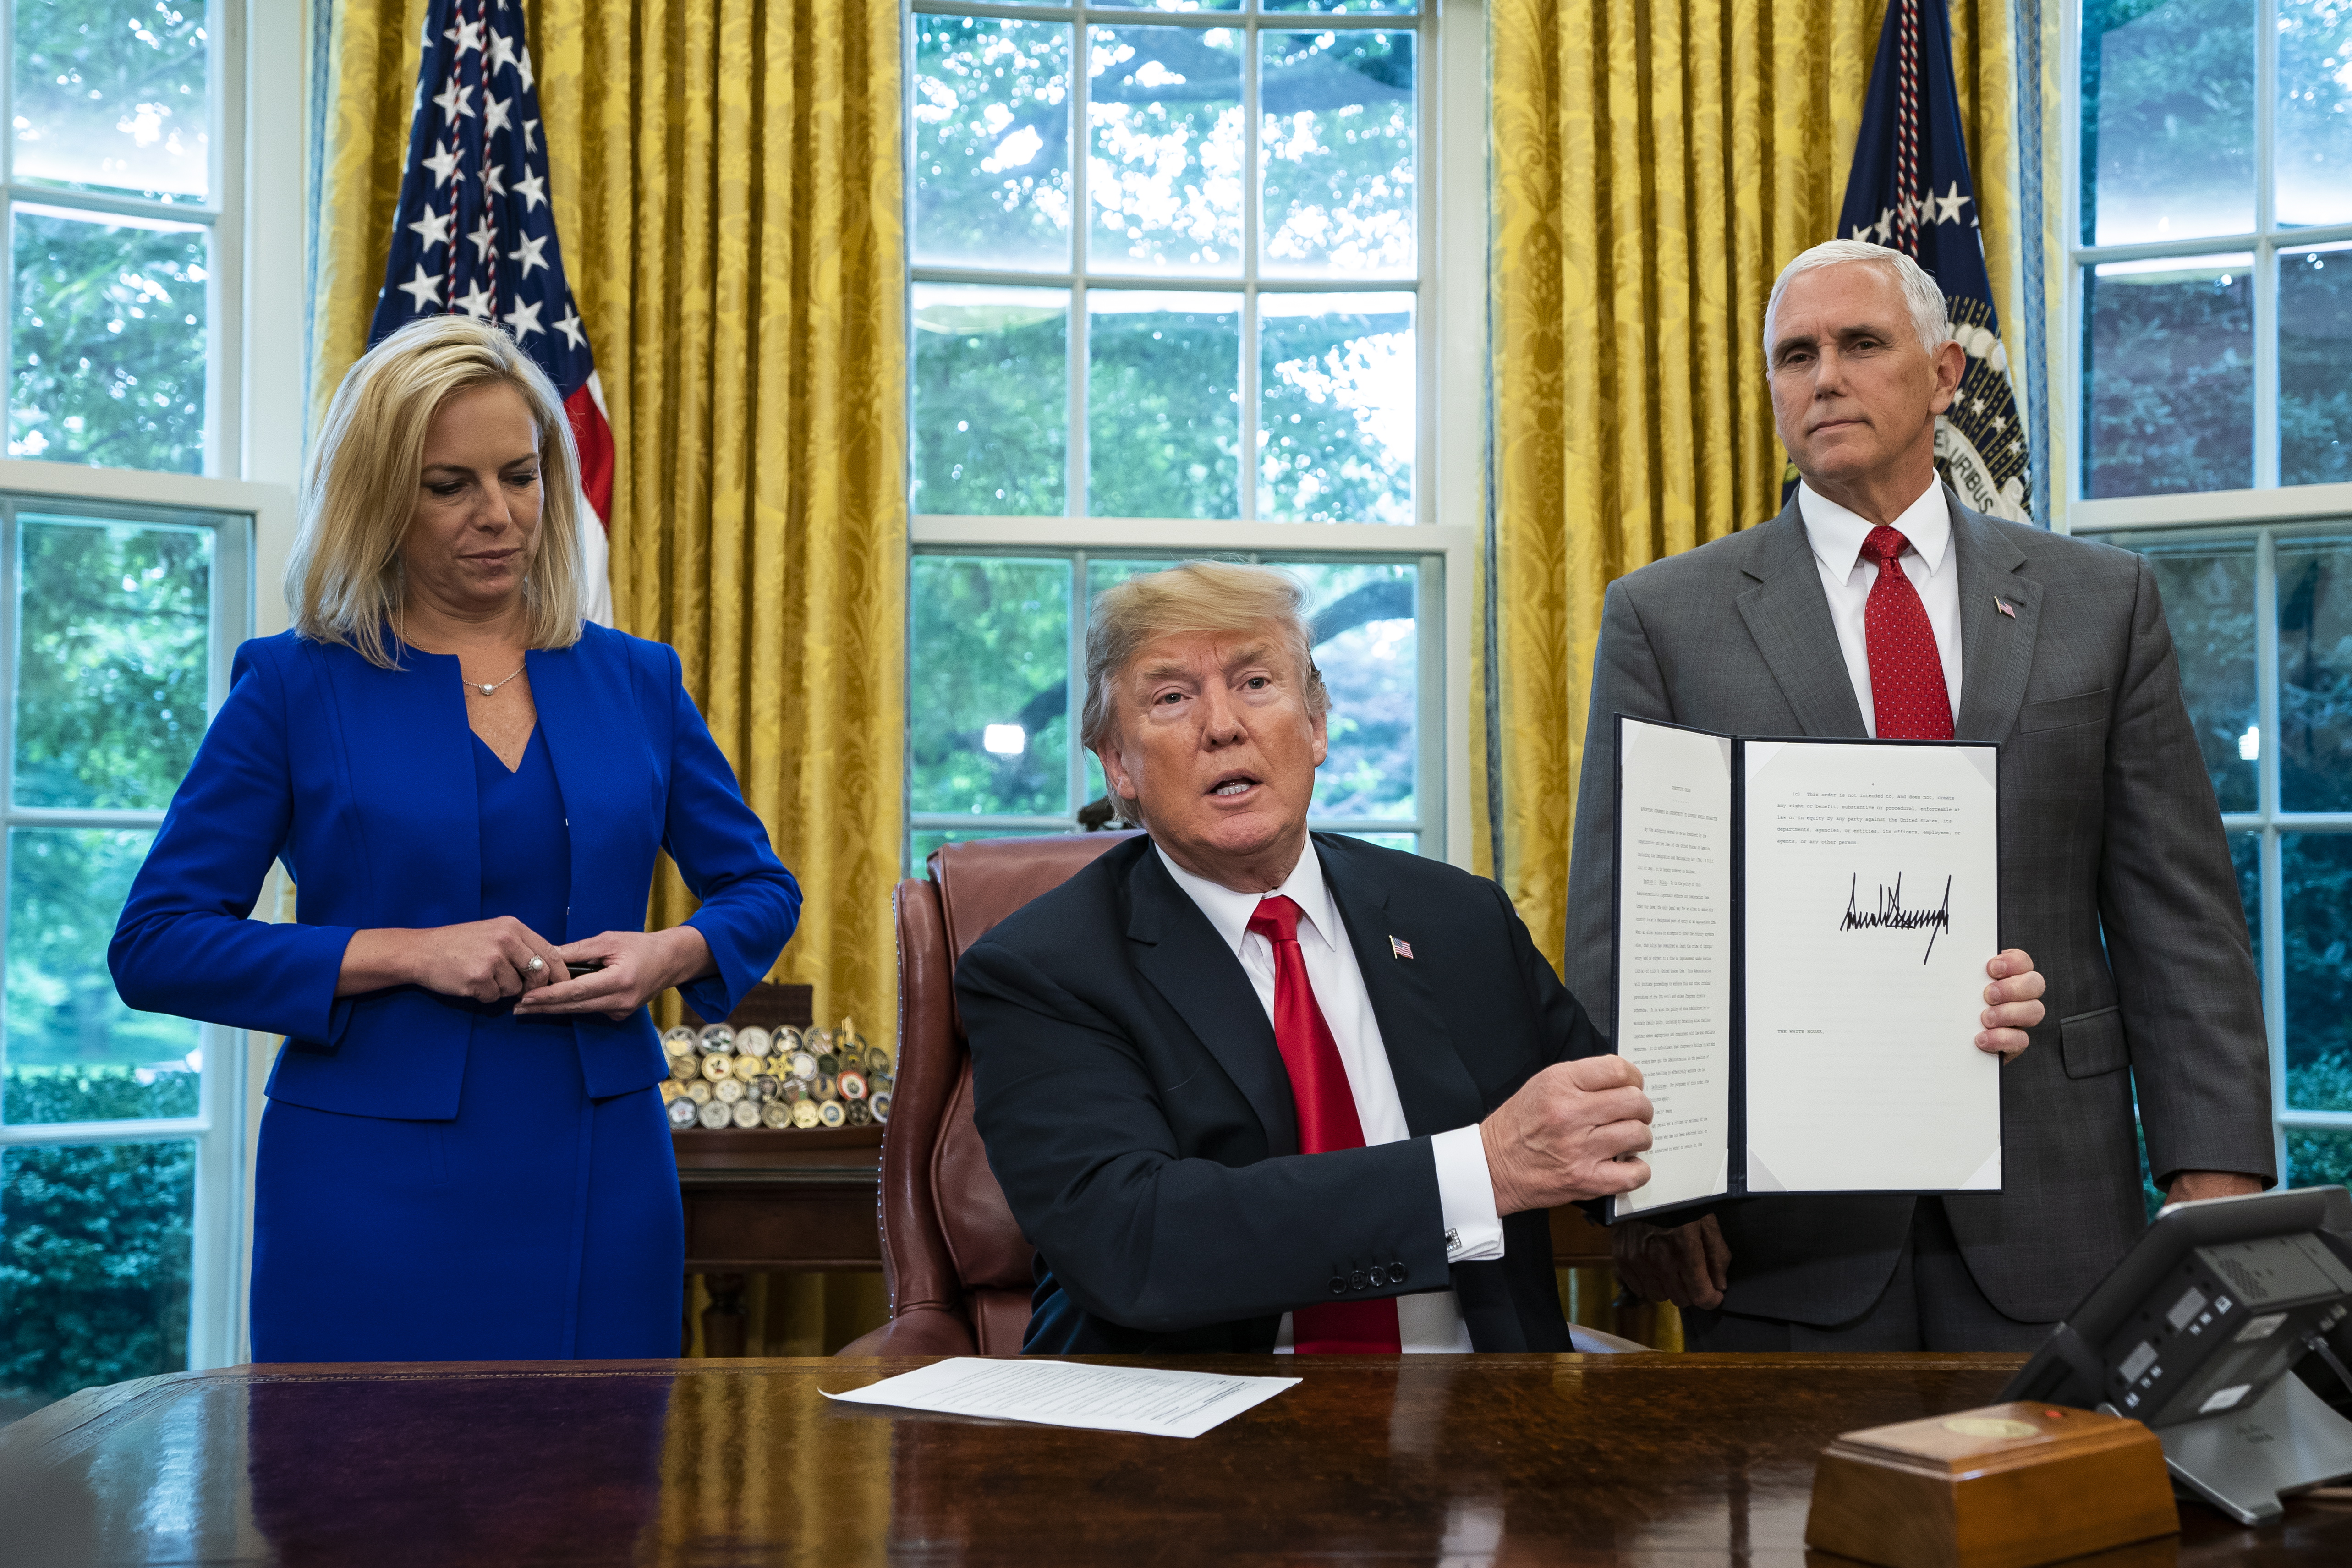 epa06825657 US President Donald J. Trump (C), flanked by Homeland Security Secretary Kirstjen Nielsen (L) and Vice President Mike Pence (R), holds an executive order he signed to stop migrant children from being separated from their parents at the US border in the Cabinet Room of the White House Washington, DC, USA 20 June 2018.  The Trump administration was facing bipartisan criticism for its 'zero tolerance' policy at the border, which resulted in the separations.  EPA/JIM LO SCALZO